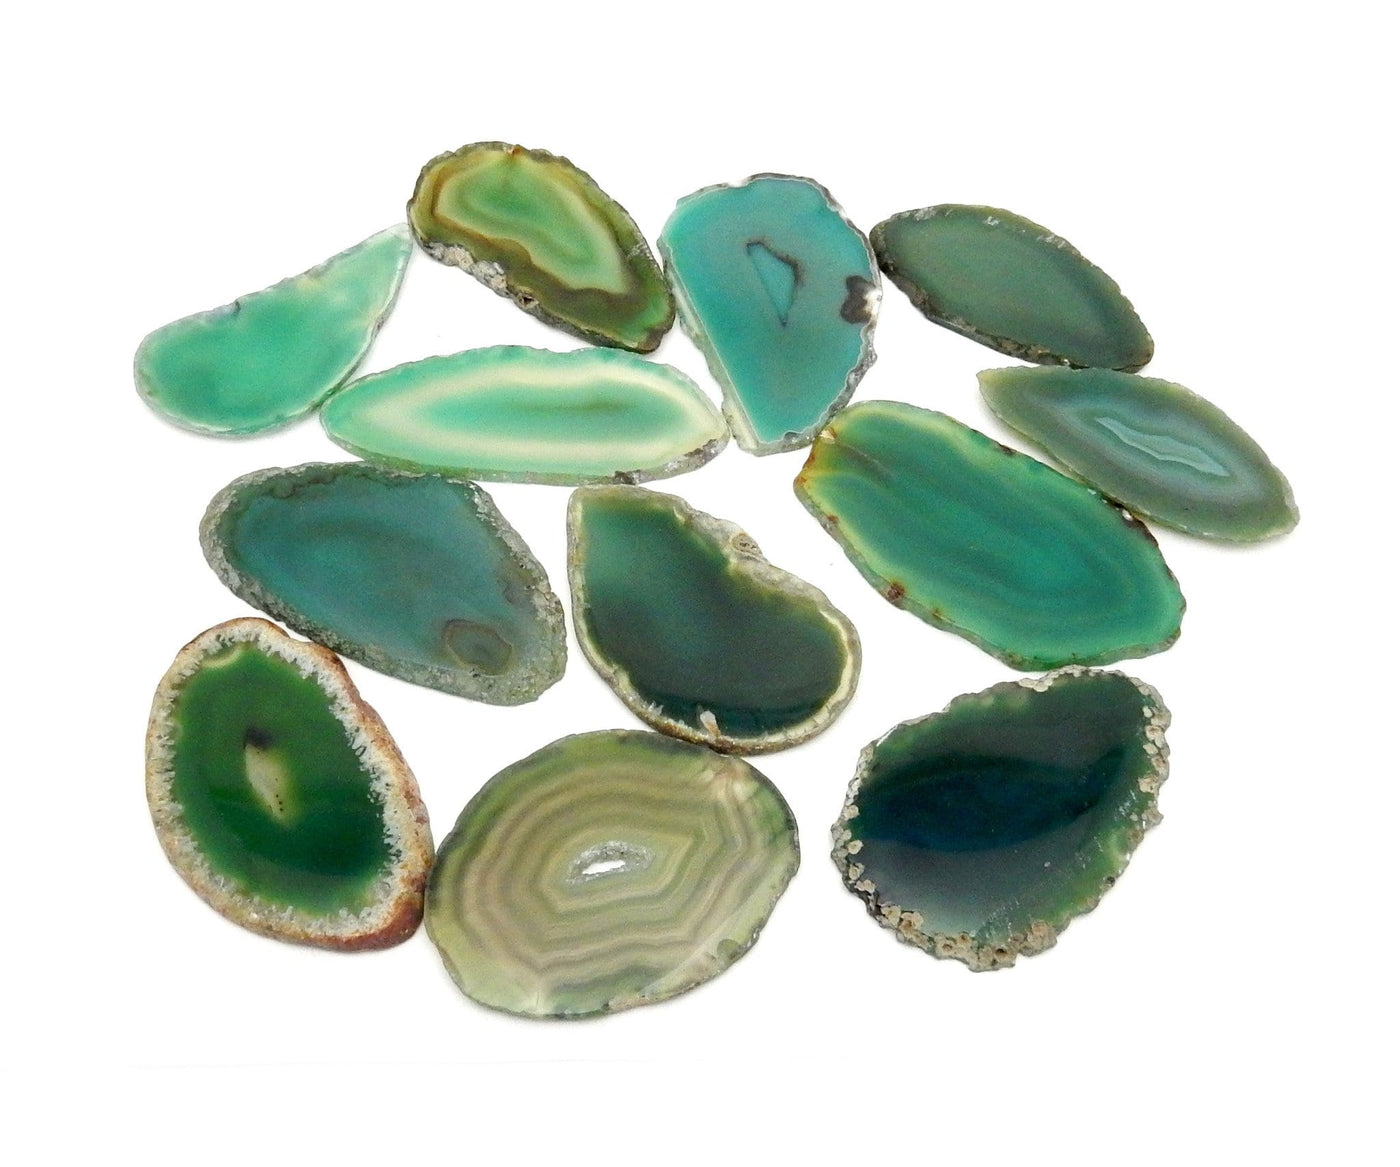 Picture of green agate slices in hand for size reference.